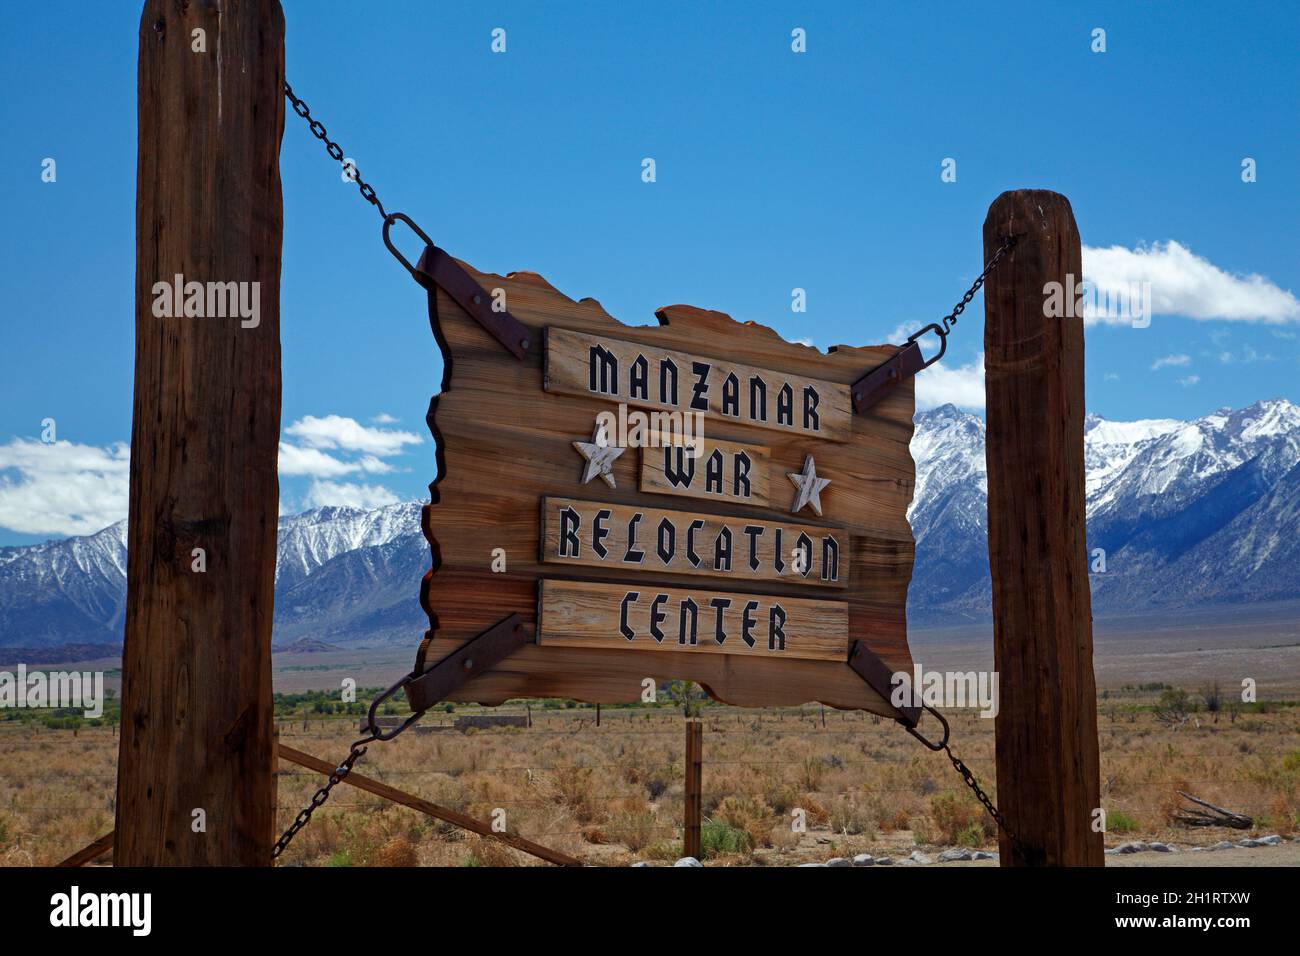 Sign for Manzanar War Relocation Center (WWII prison camp), and Sierra Nevada Mountain Range, near lone Pine, Owens Valley, California, USA Stock Photo